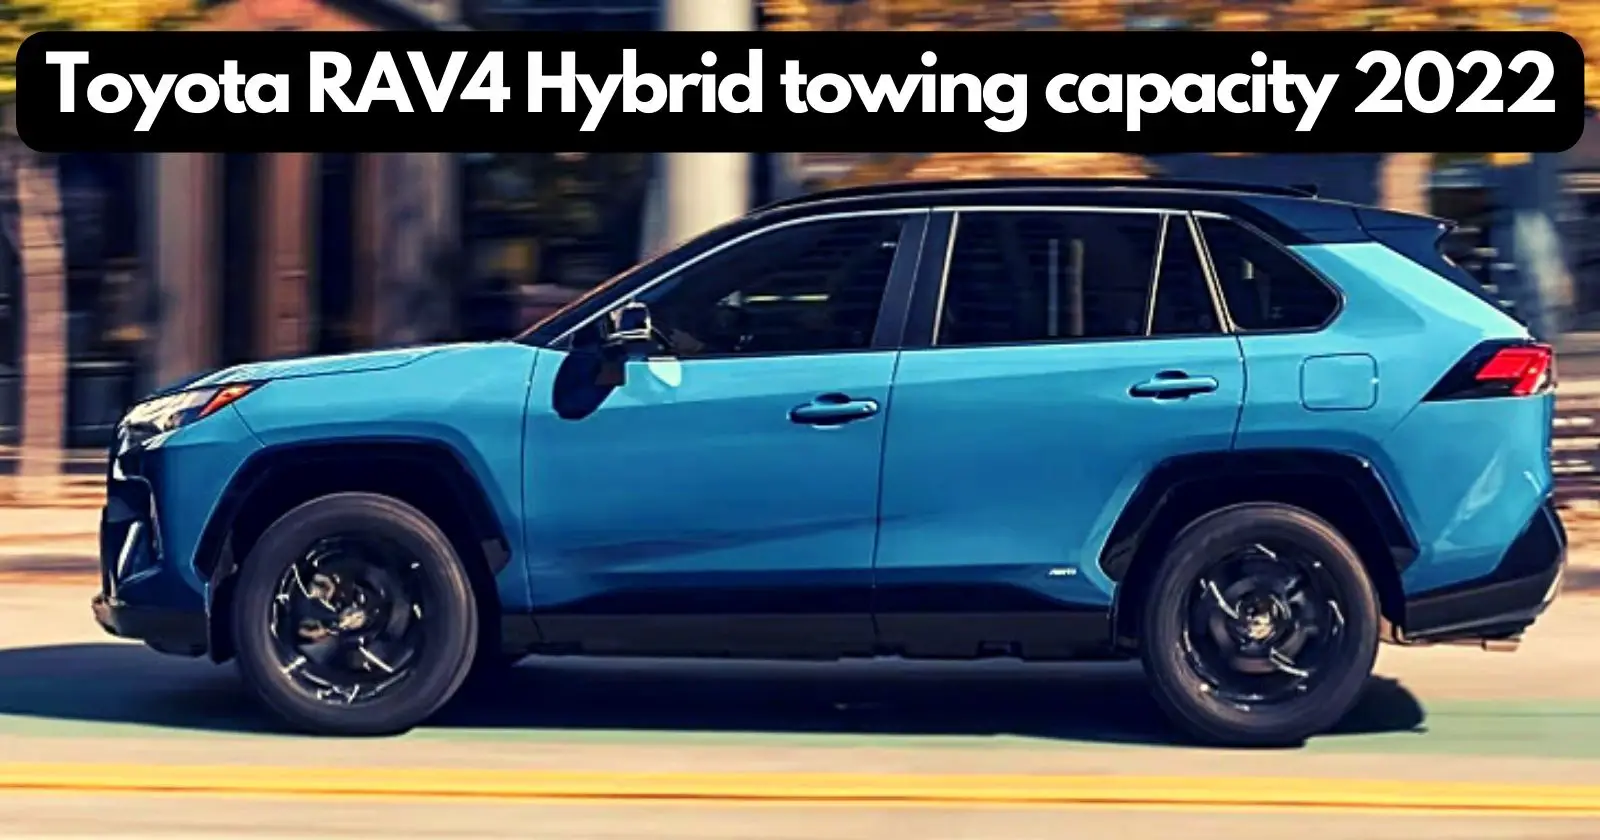 What is the Toyota RAV4 Hybrid towing capacity 2022 Best two way 